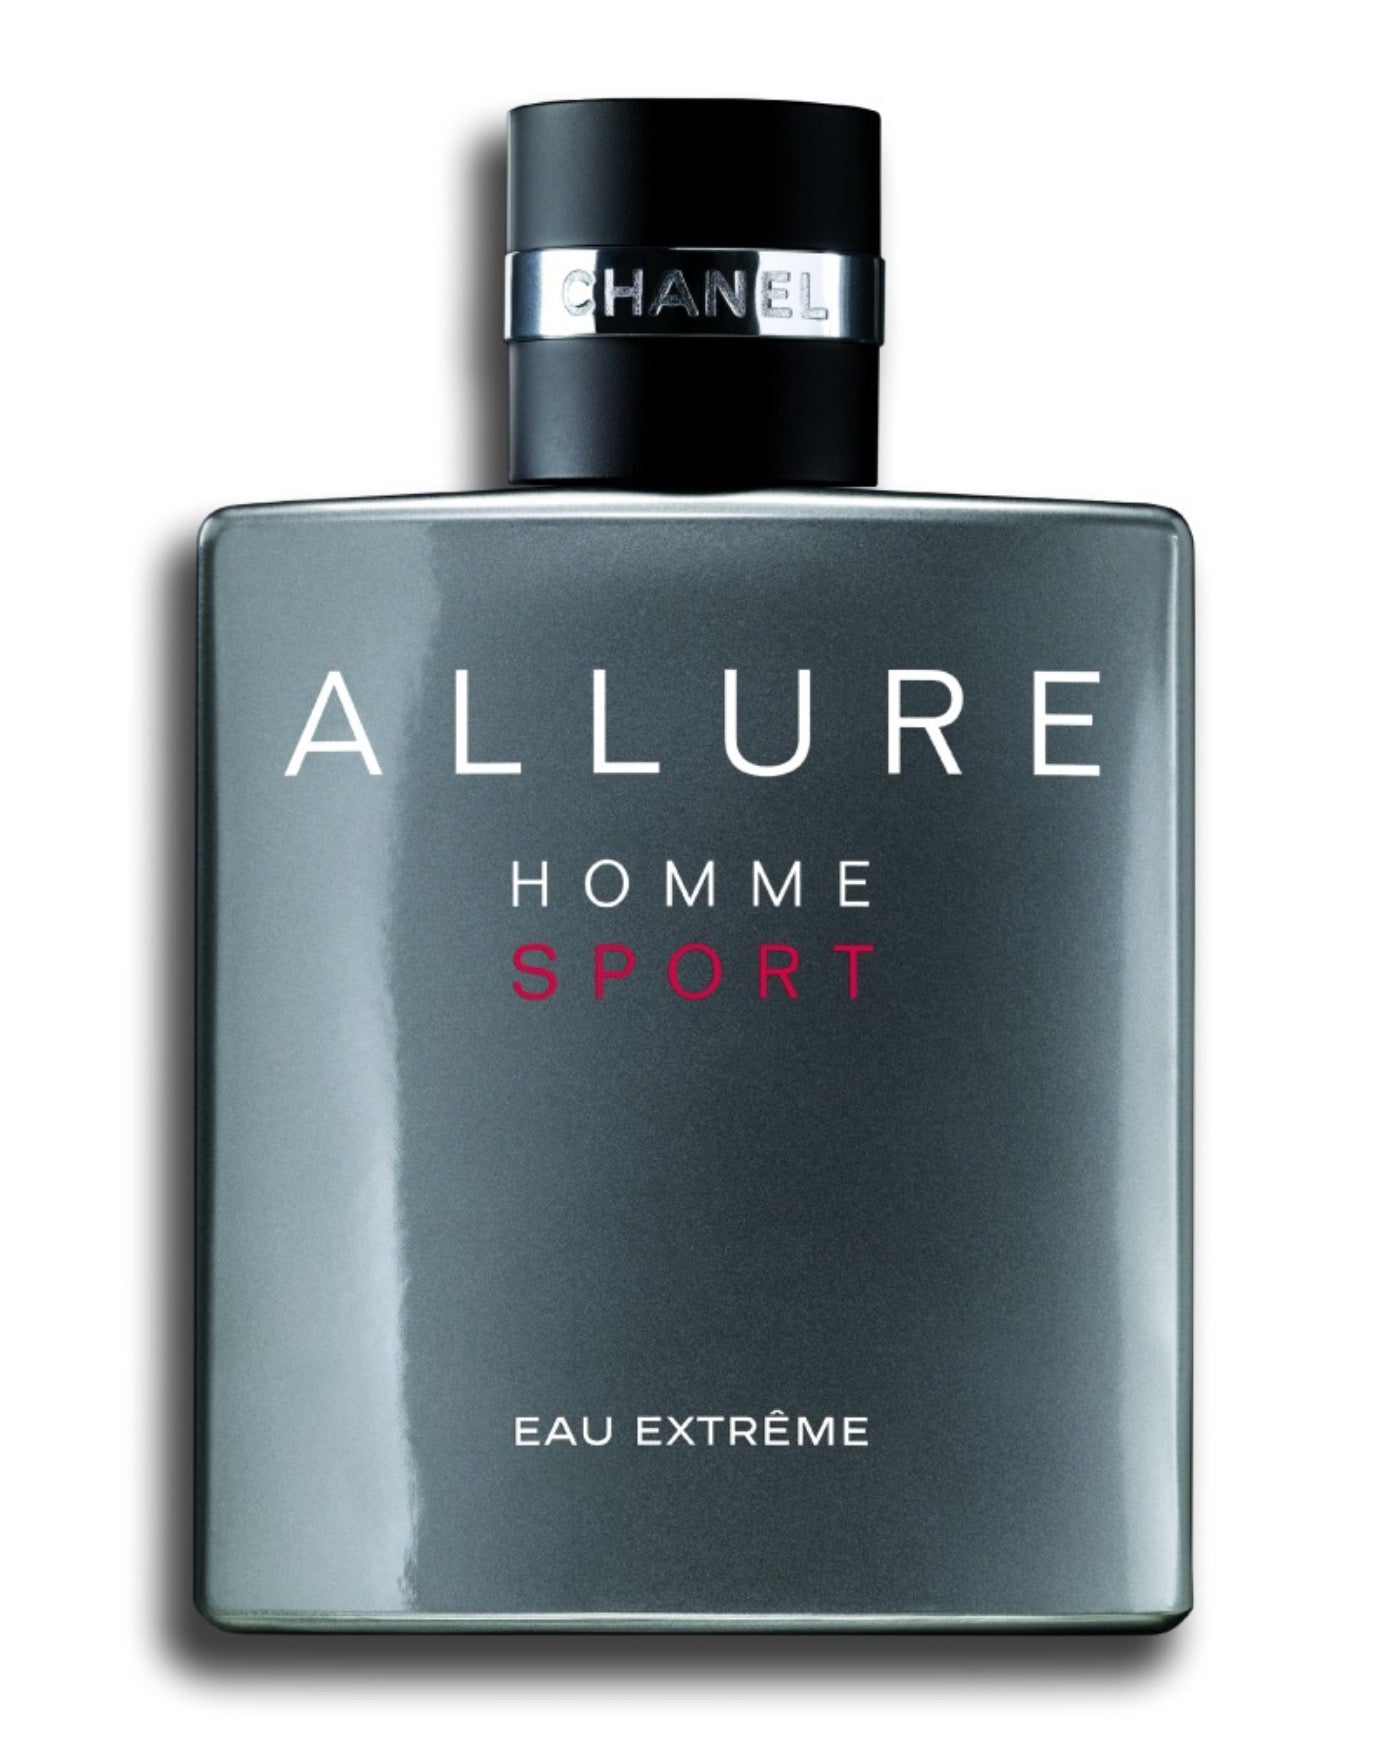 Chanel Allure Homme Sport Eau Extreme EDP 100 ml - 85% Remaining